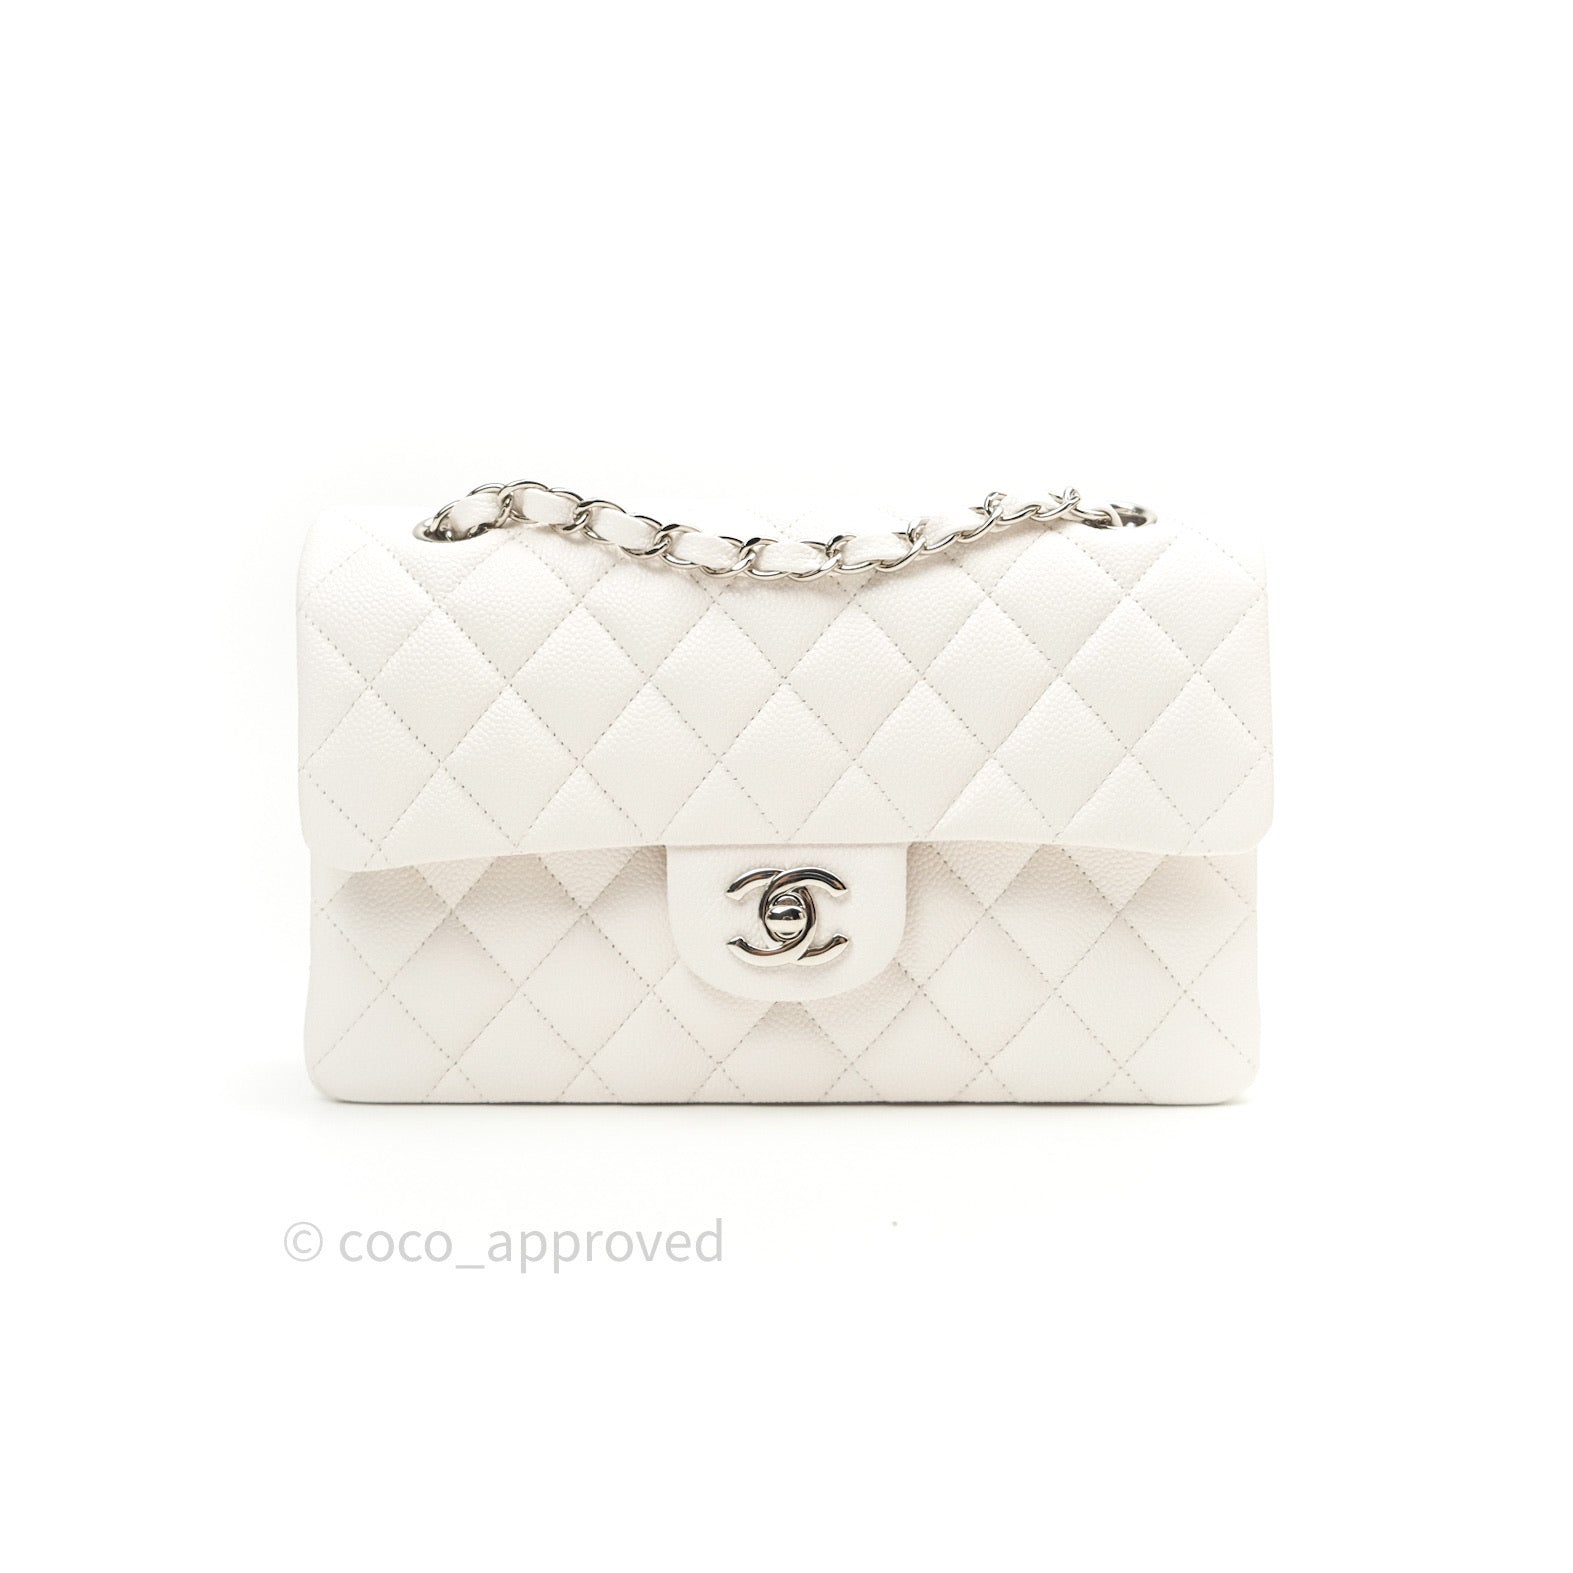 white chanel bag with silver hardware purse